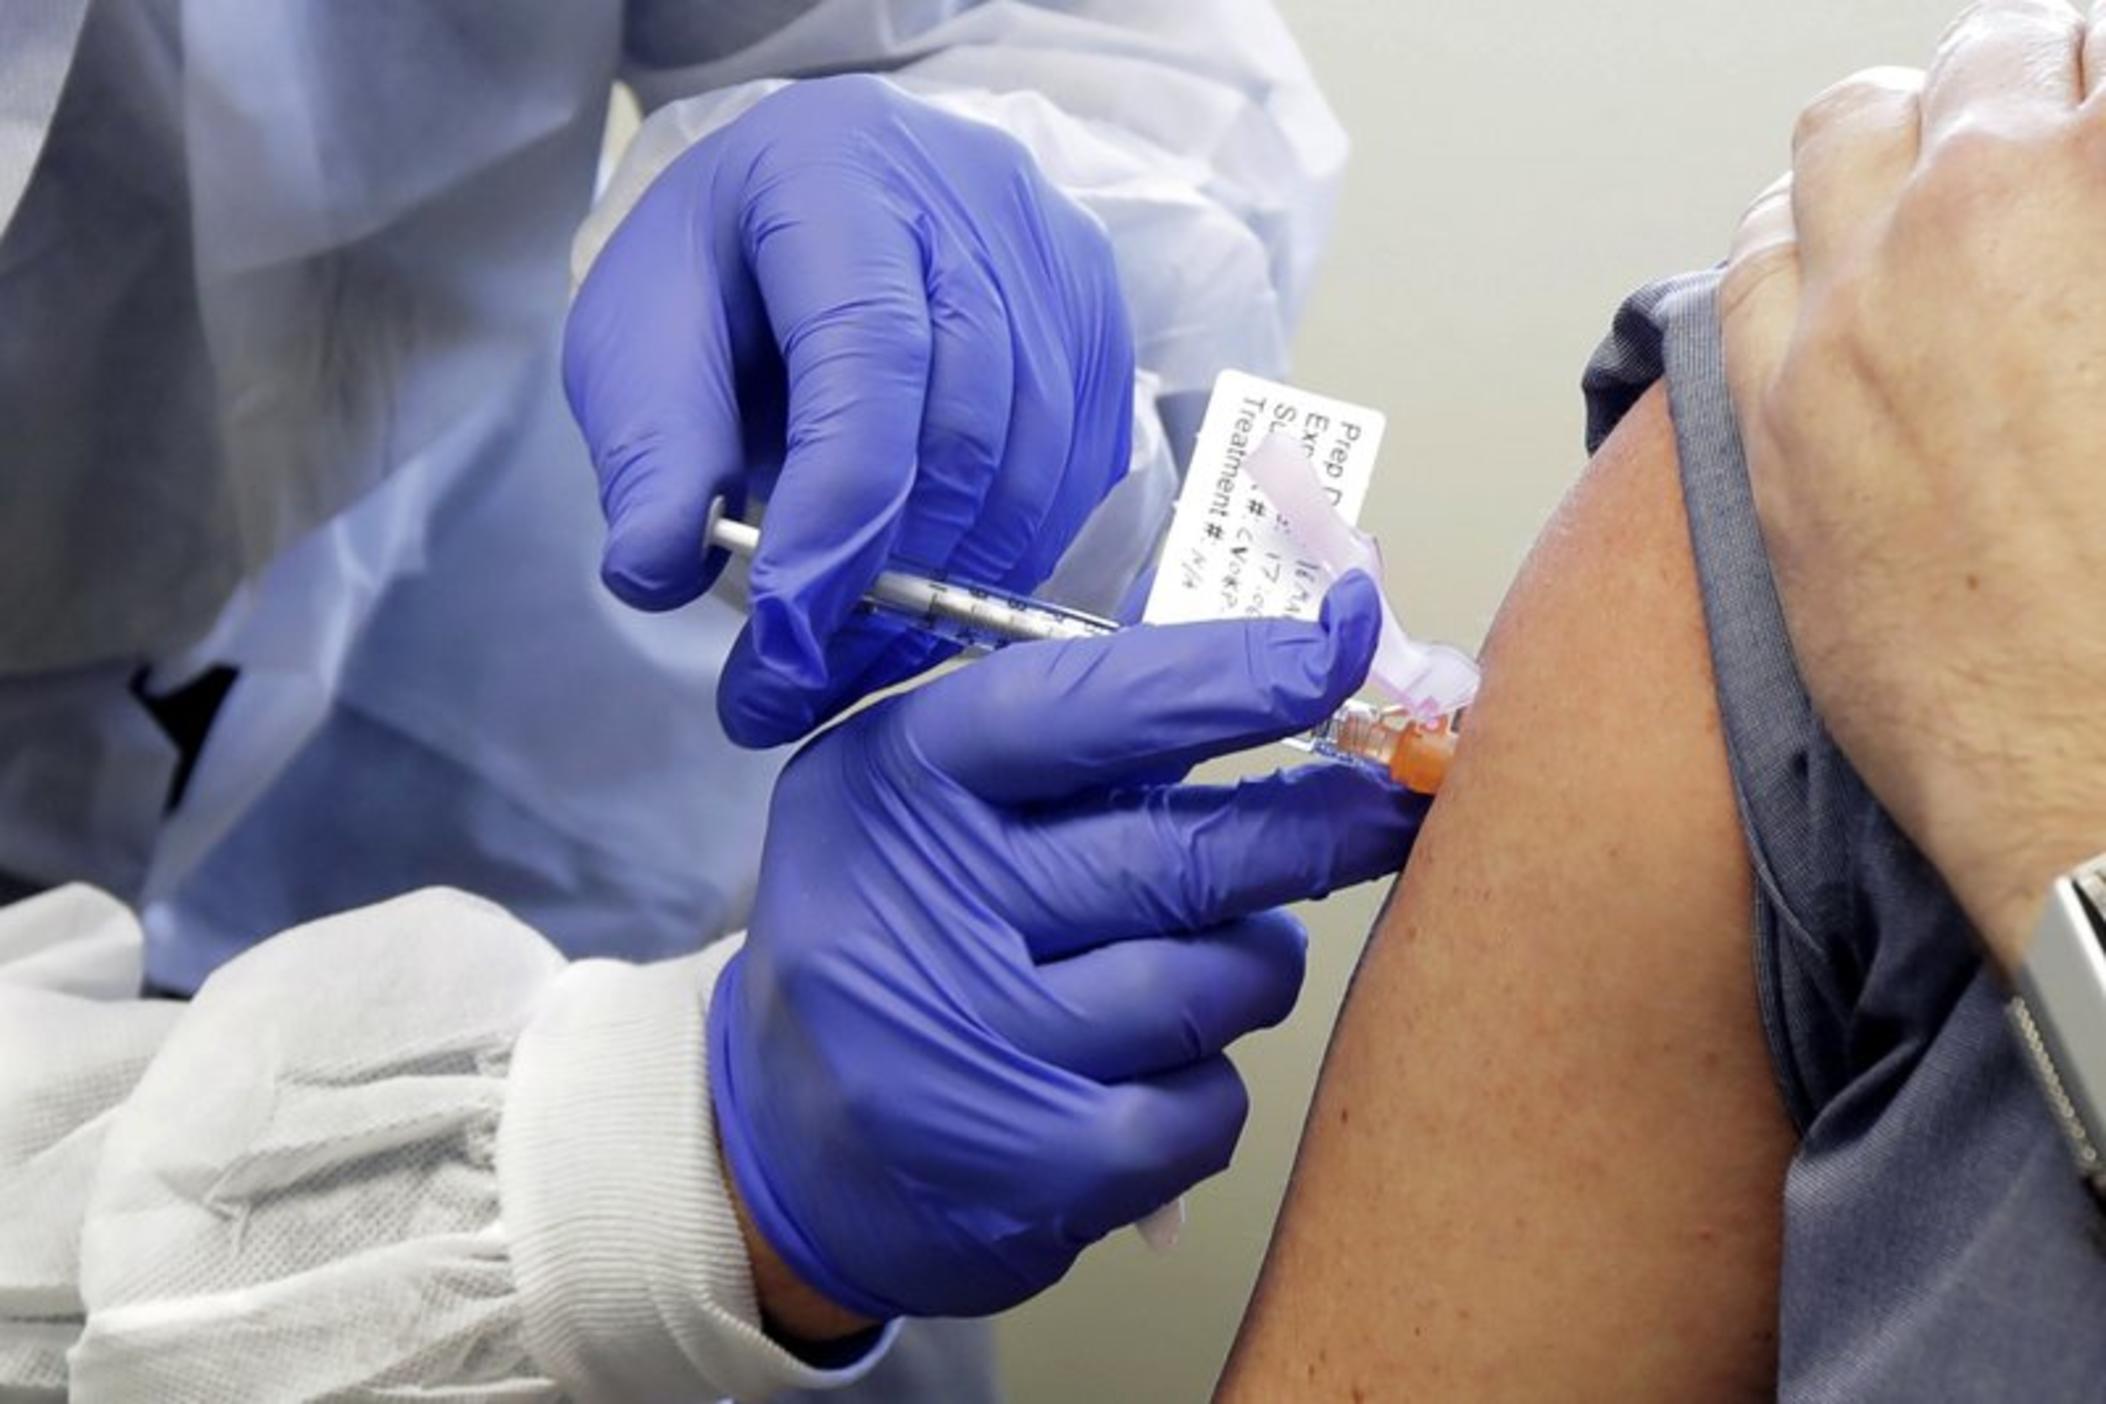 A vaccine shot is given in a person's shoulder